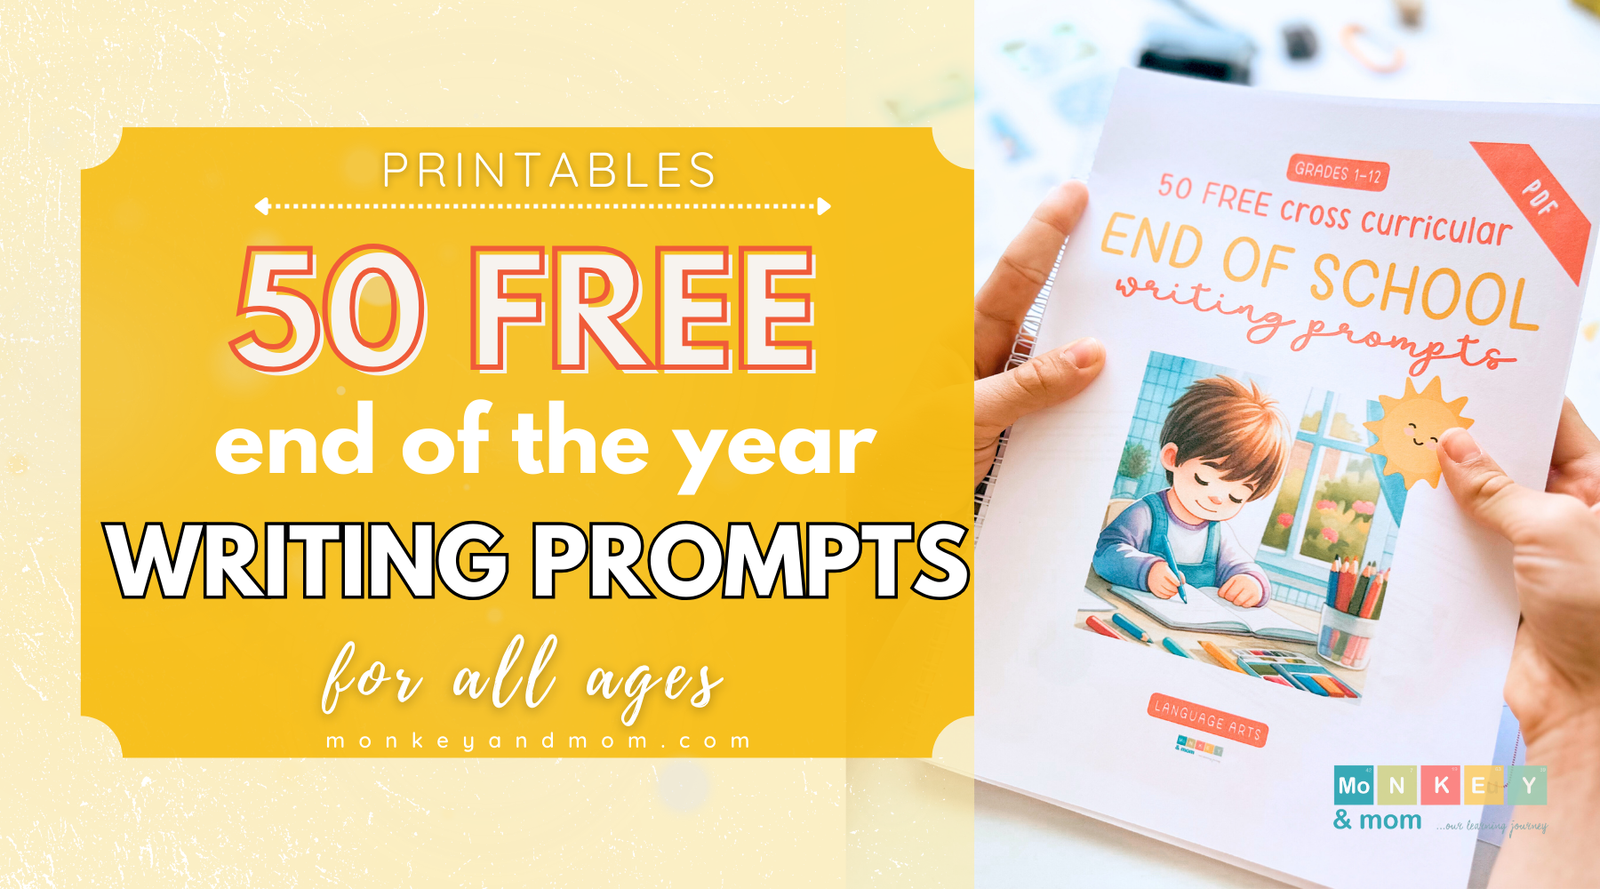 50 free end of the school year writing prompts for all ages